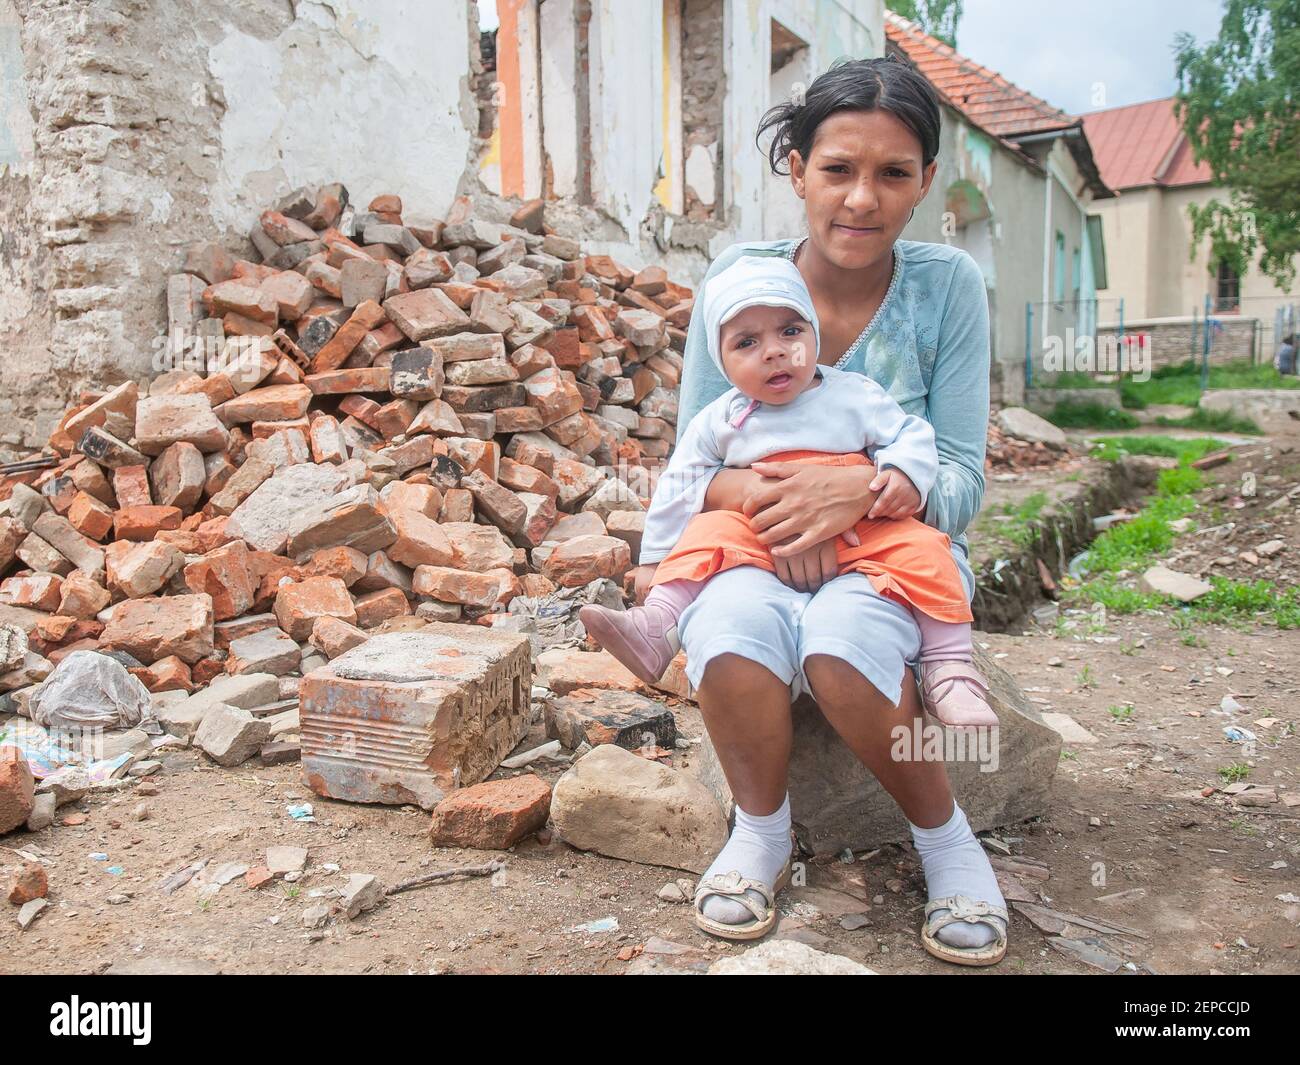 Lomnicka, Slovakia. 05-16-2018. Gypsy mother and daughter living in misery and poverty in a abandoned Roma community in the heart of Slovakia. Stock Photo